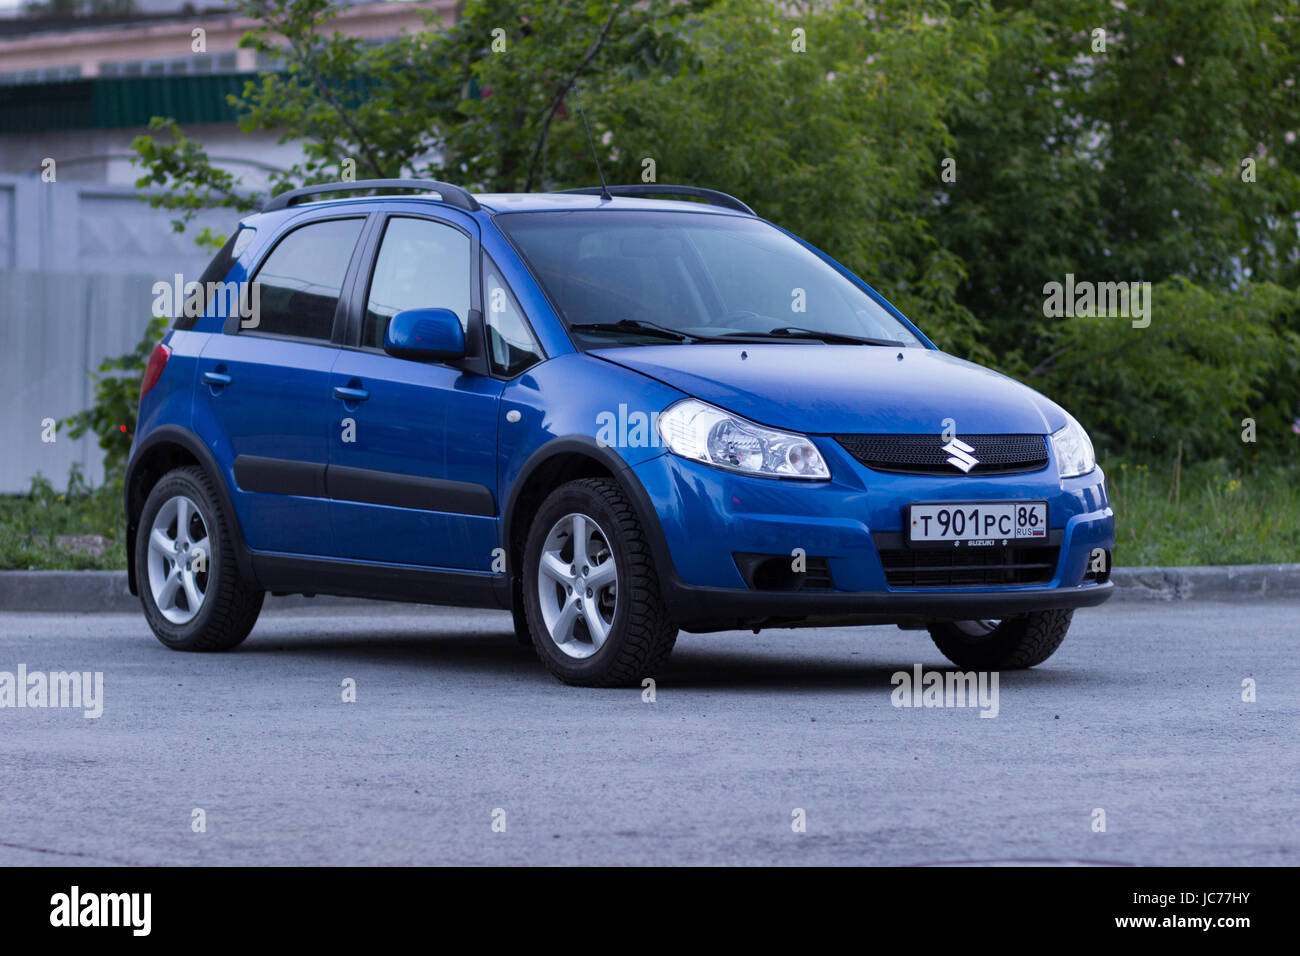 Ekaterinburg, Russia June 11, 2017 - Suzuki SX4 car of blue color stands on the asphalt parking lot in the evening Stock Photo